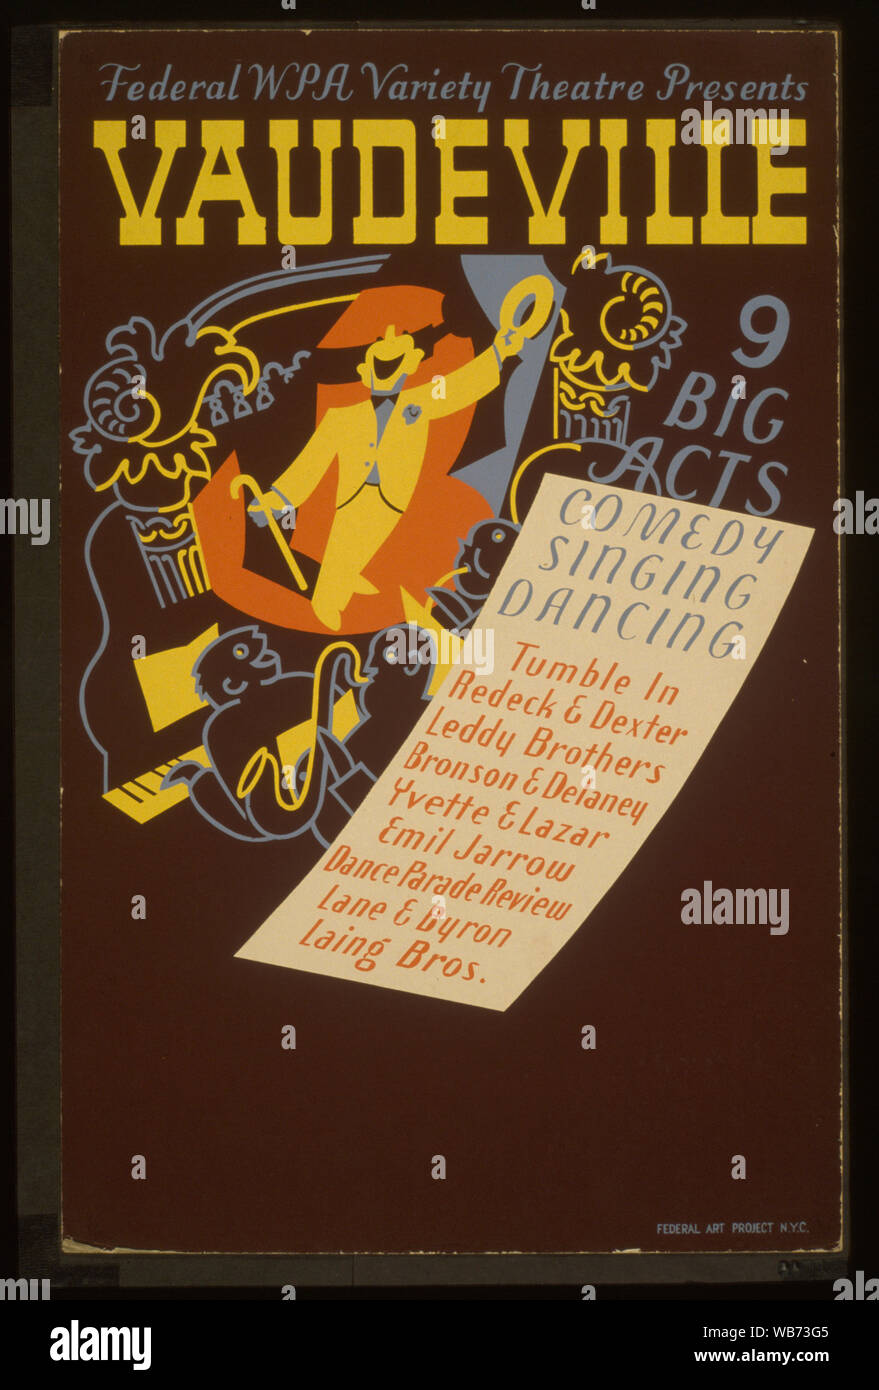 Federal WPA Variety Theatre presents vaudeville Abstract: Poster for Federal Theatre Project vaudeville show featuring Tumble In, Redeck & Dexter, Leddy Brothers, Bronson & Delaney, Yvette & Lazar, Emil Jarrow, Dance Parade Review, Lane & Byron, [and] Laing Bros., showing a man singing. Stock Photo